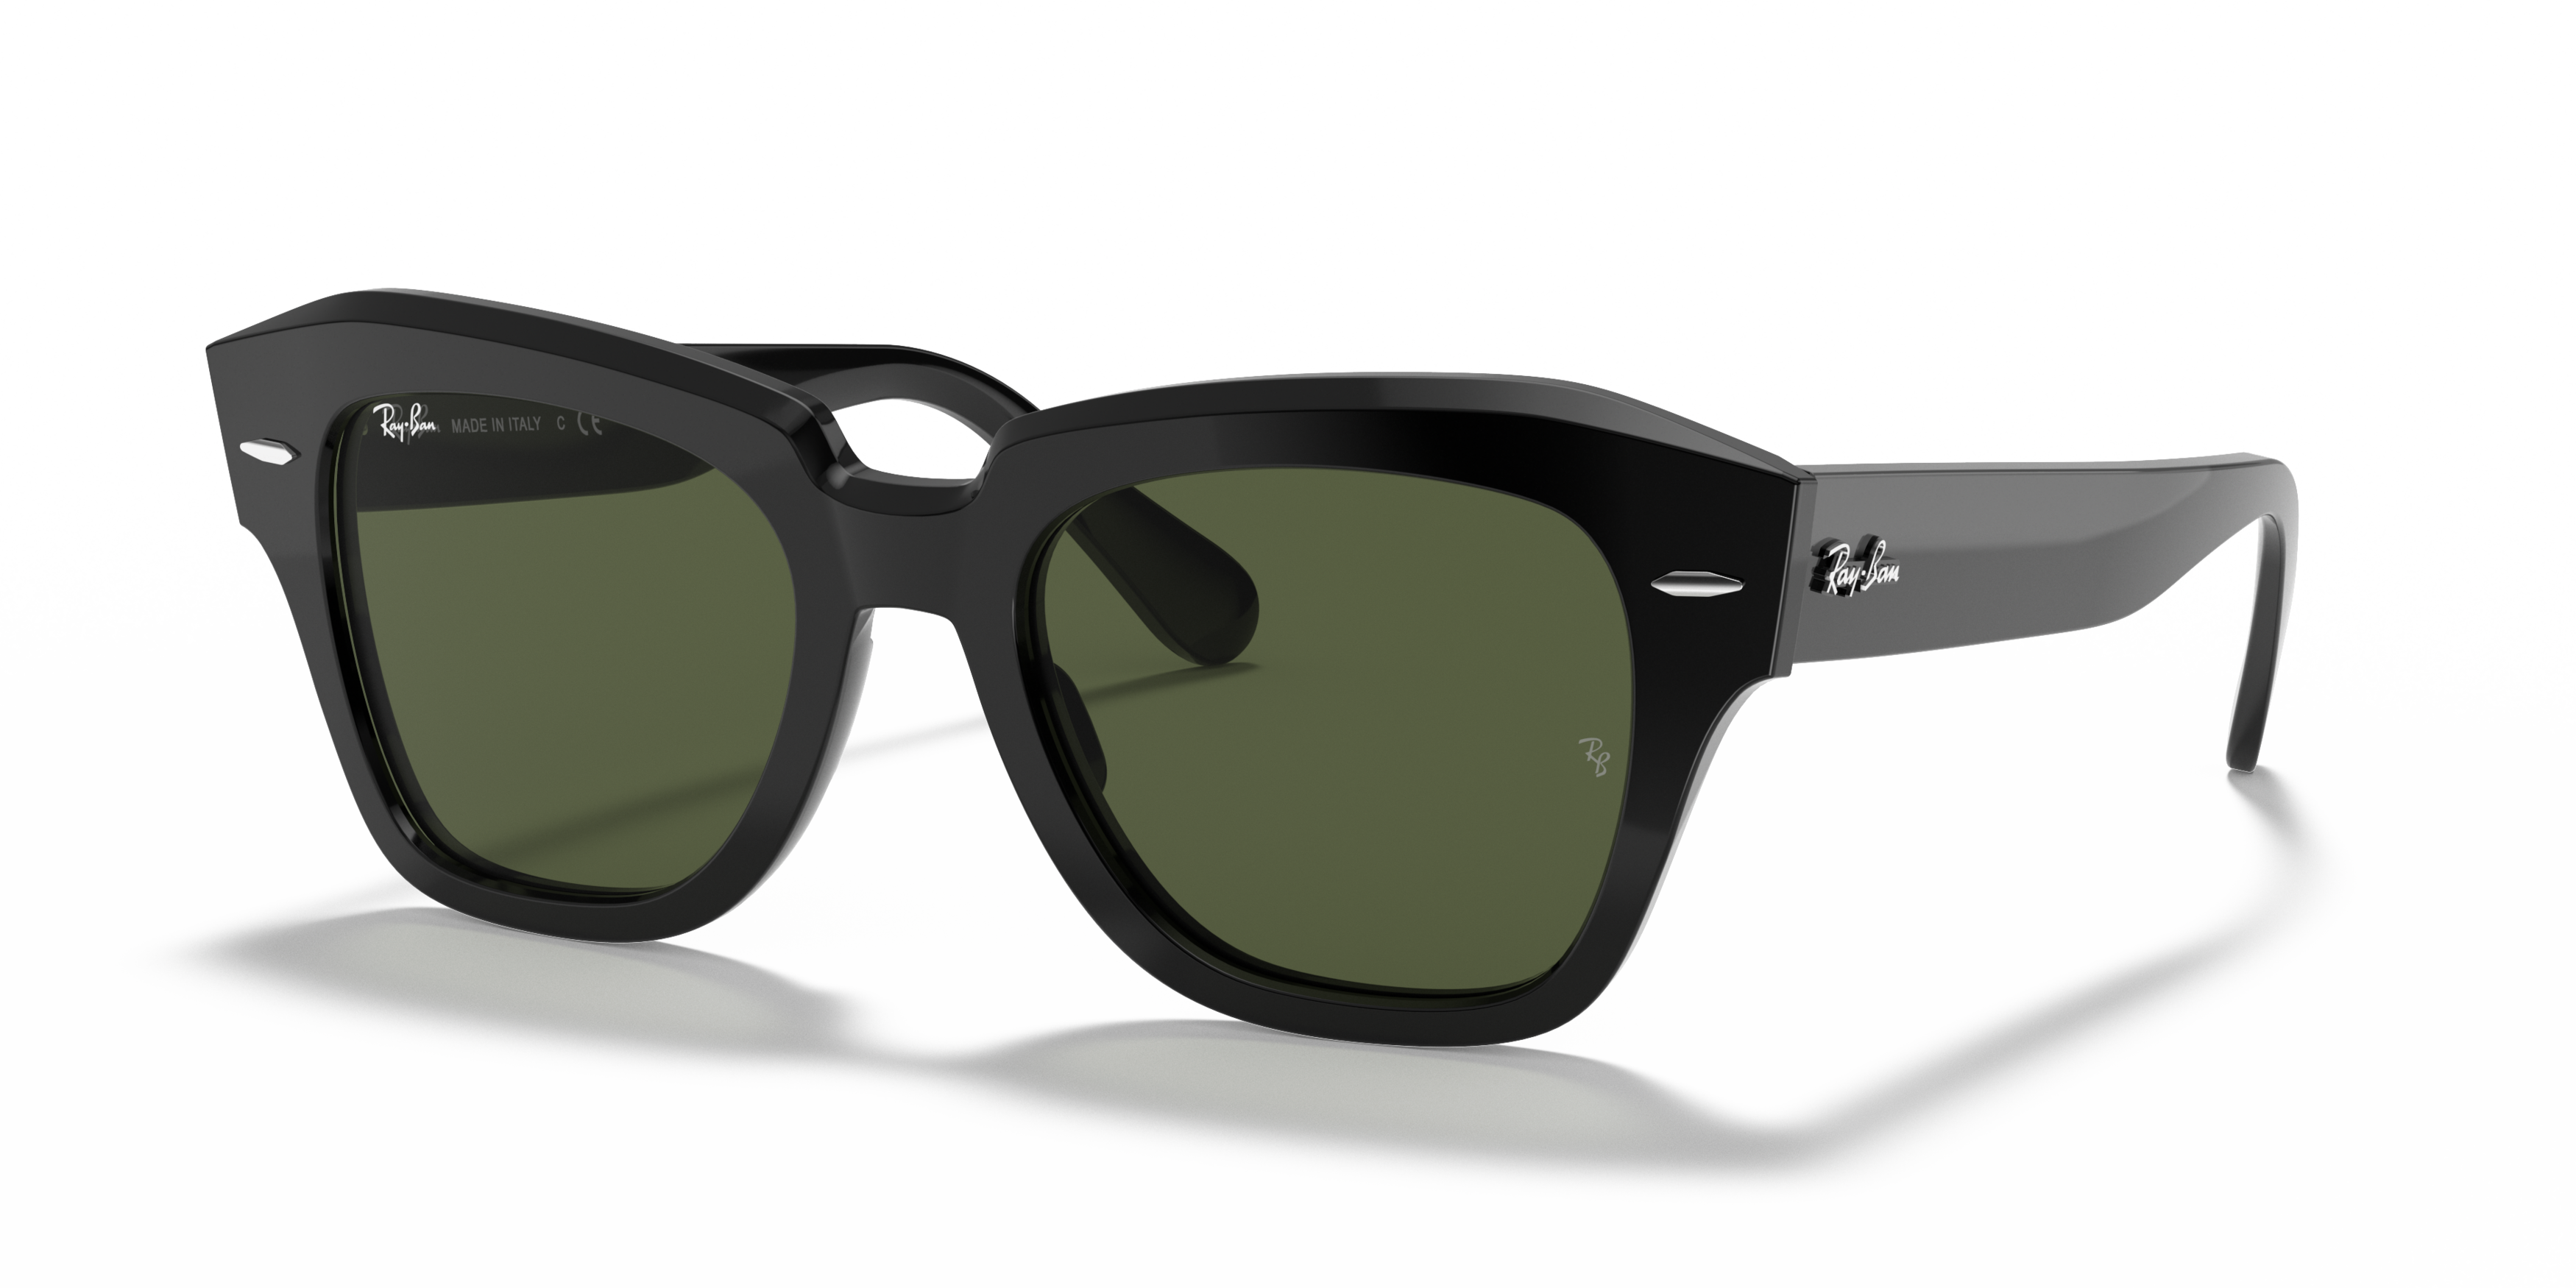 Angle_Left01 Ray-Ban State Street RB 2186 Sunglasses Green / Black